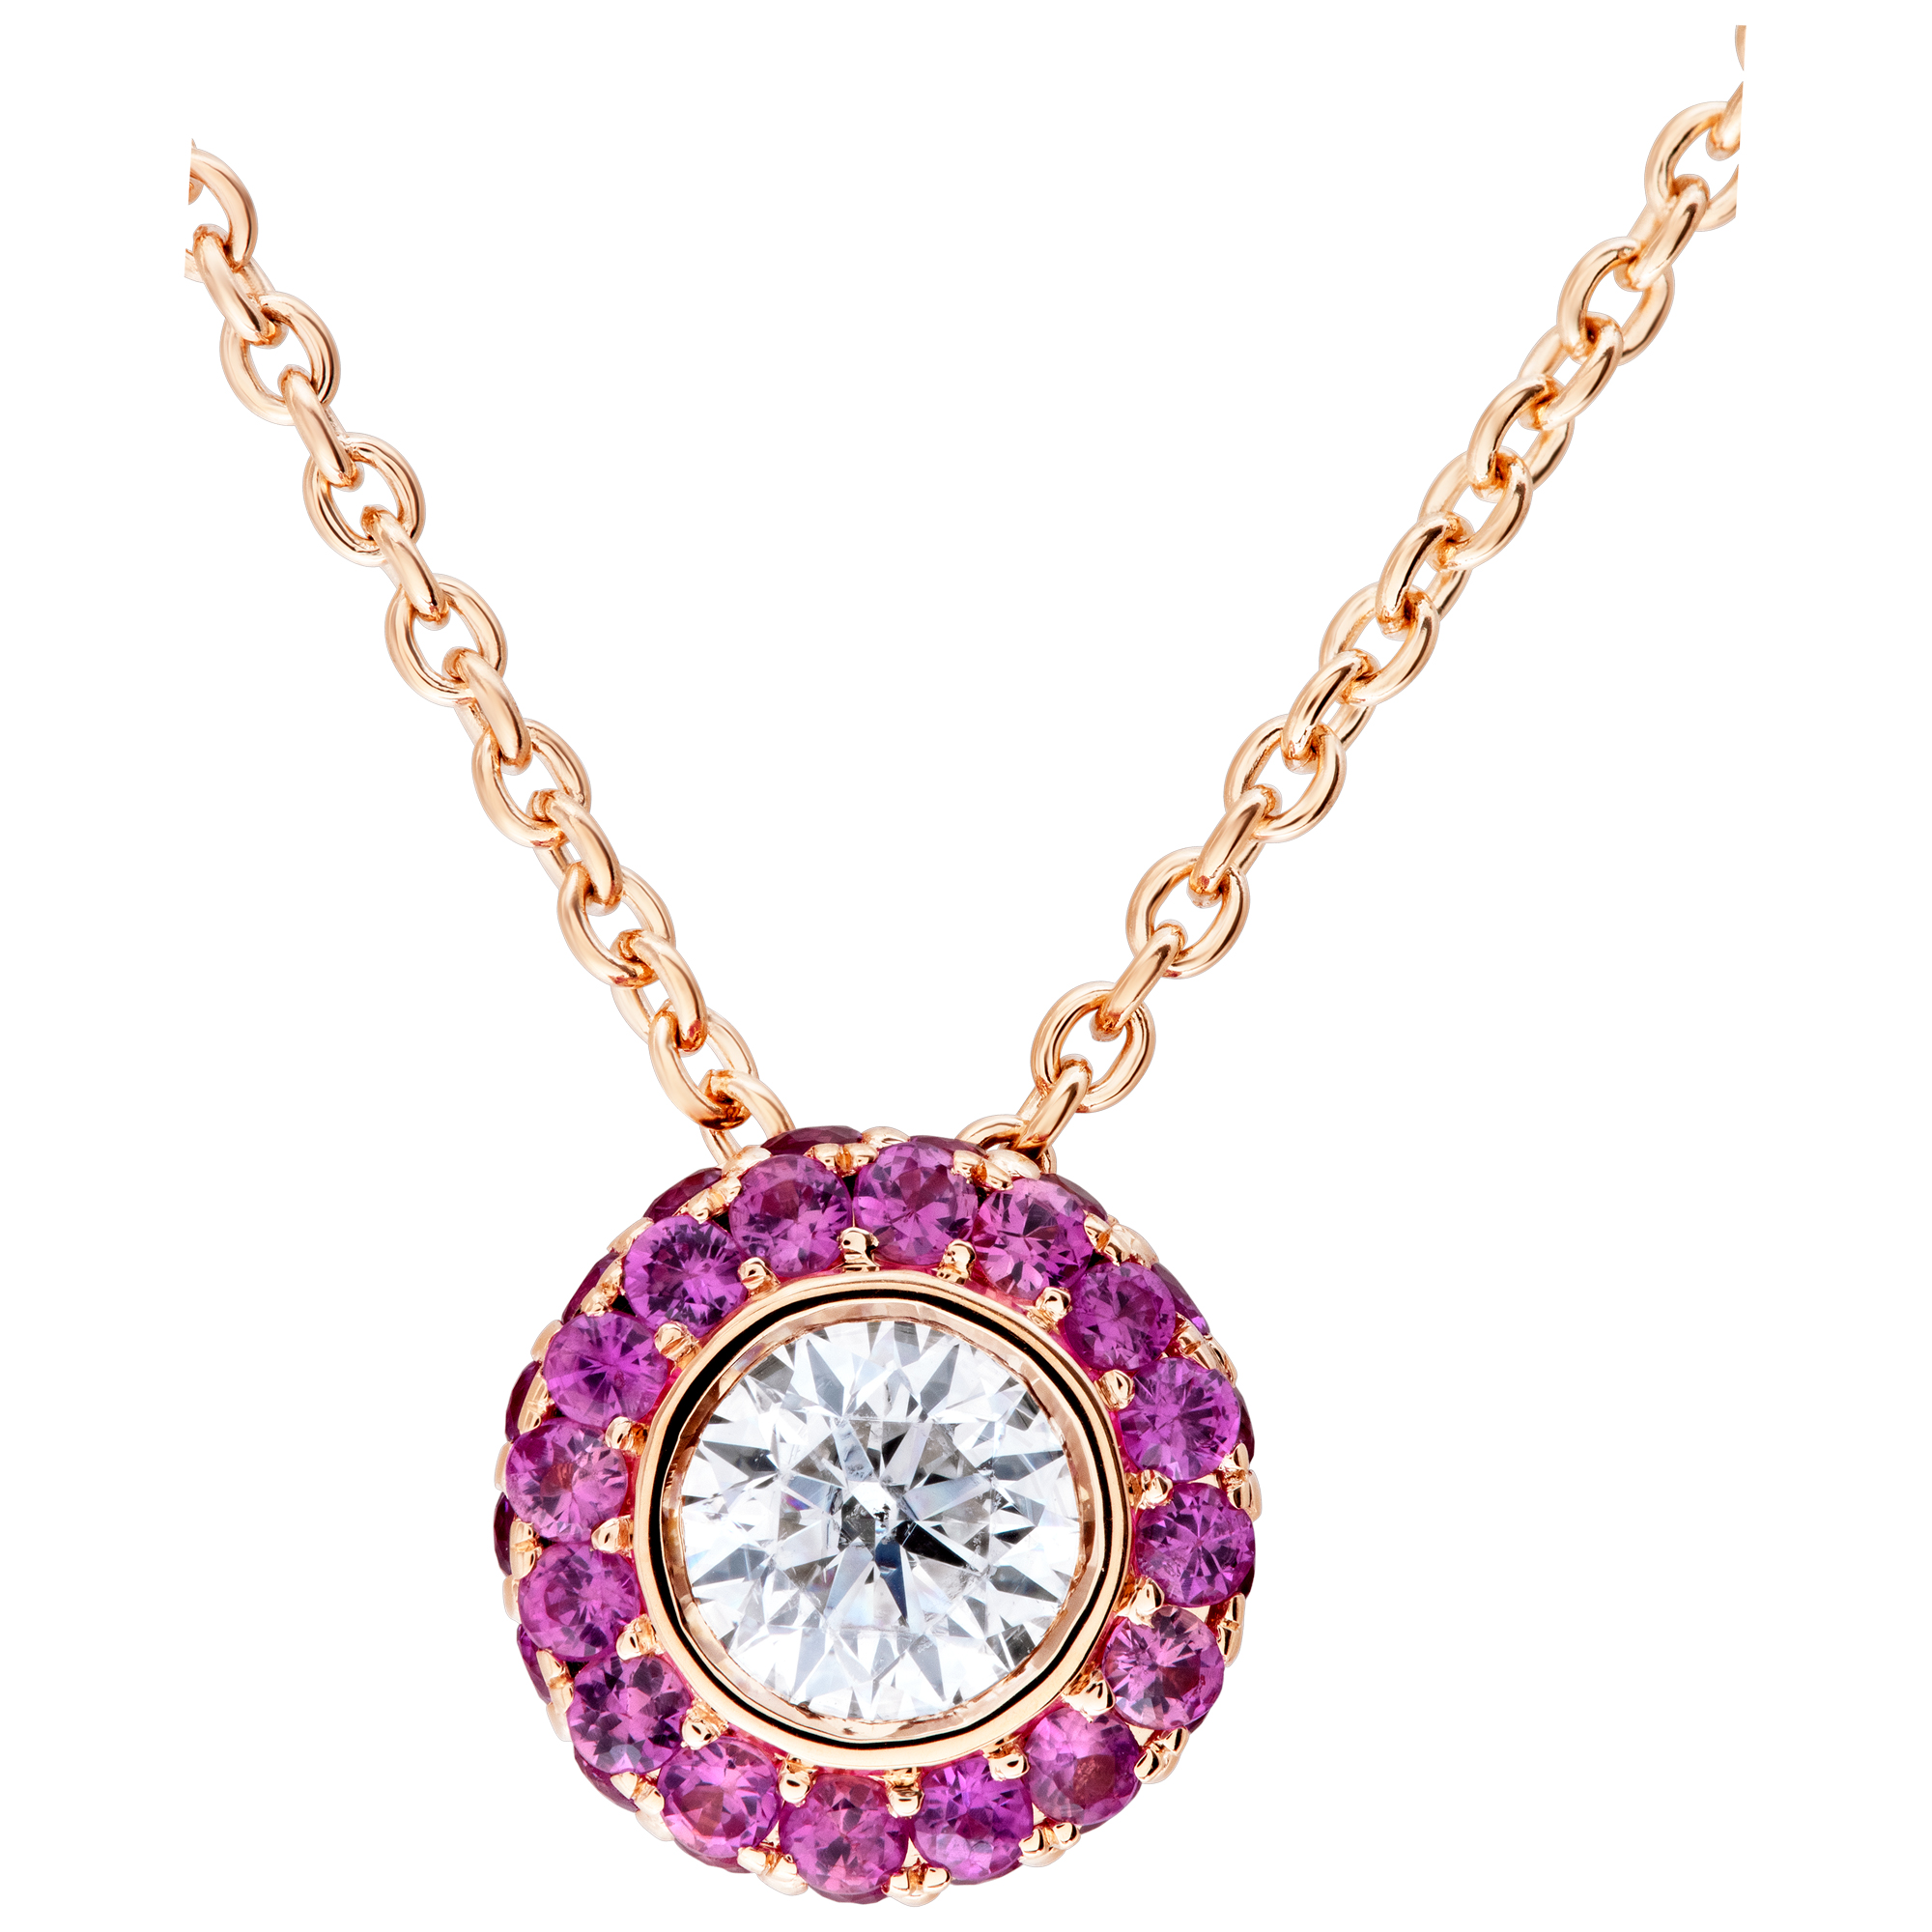 18k rose gold necklace with 0.27 carat diamond and 0.52 carat in pave pink sapphires on pendant